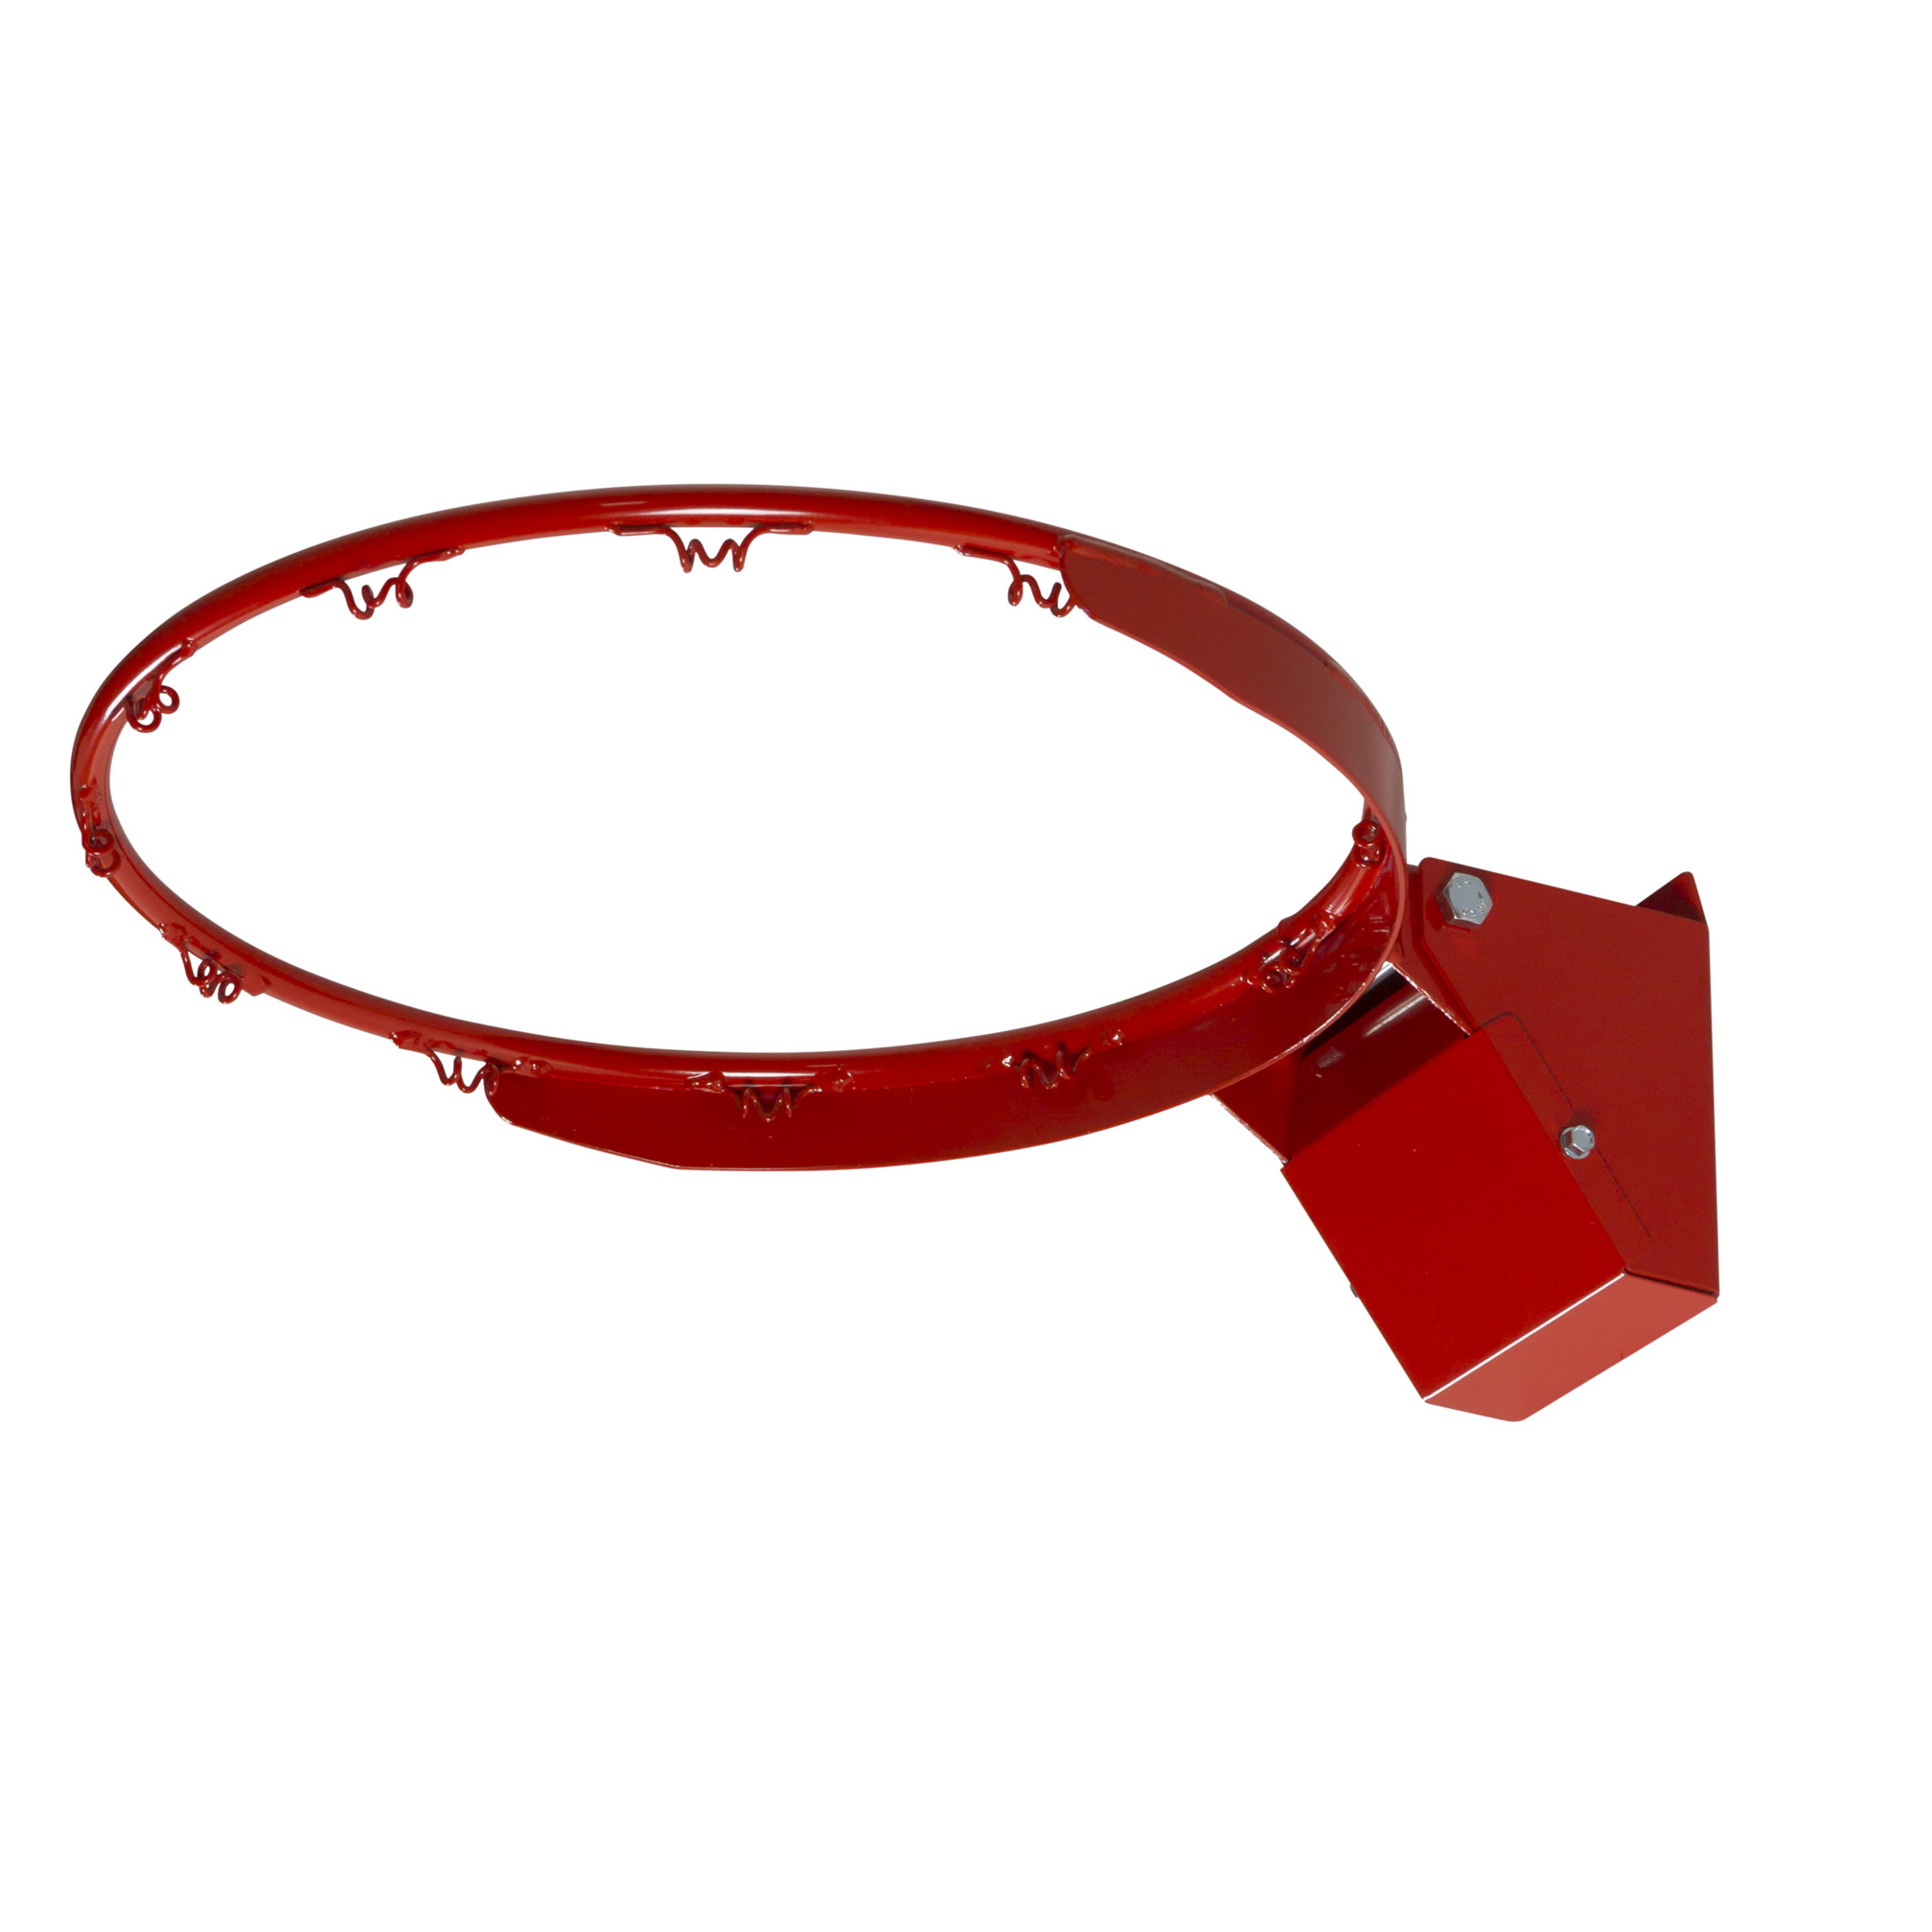 Practice dunk ring 